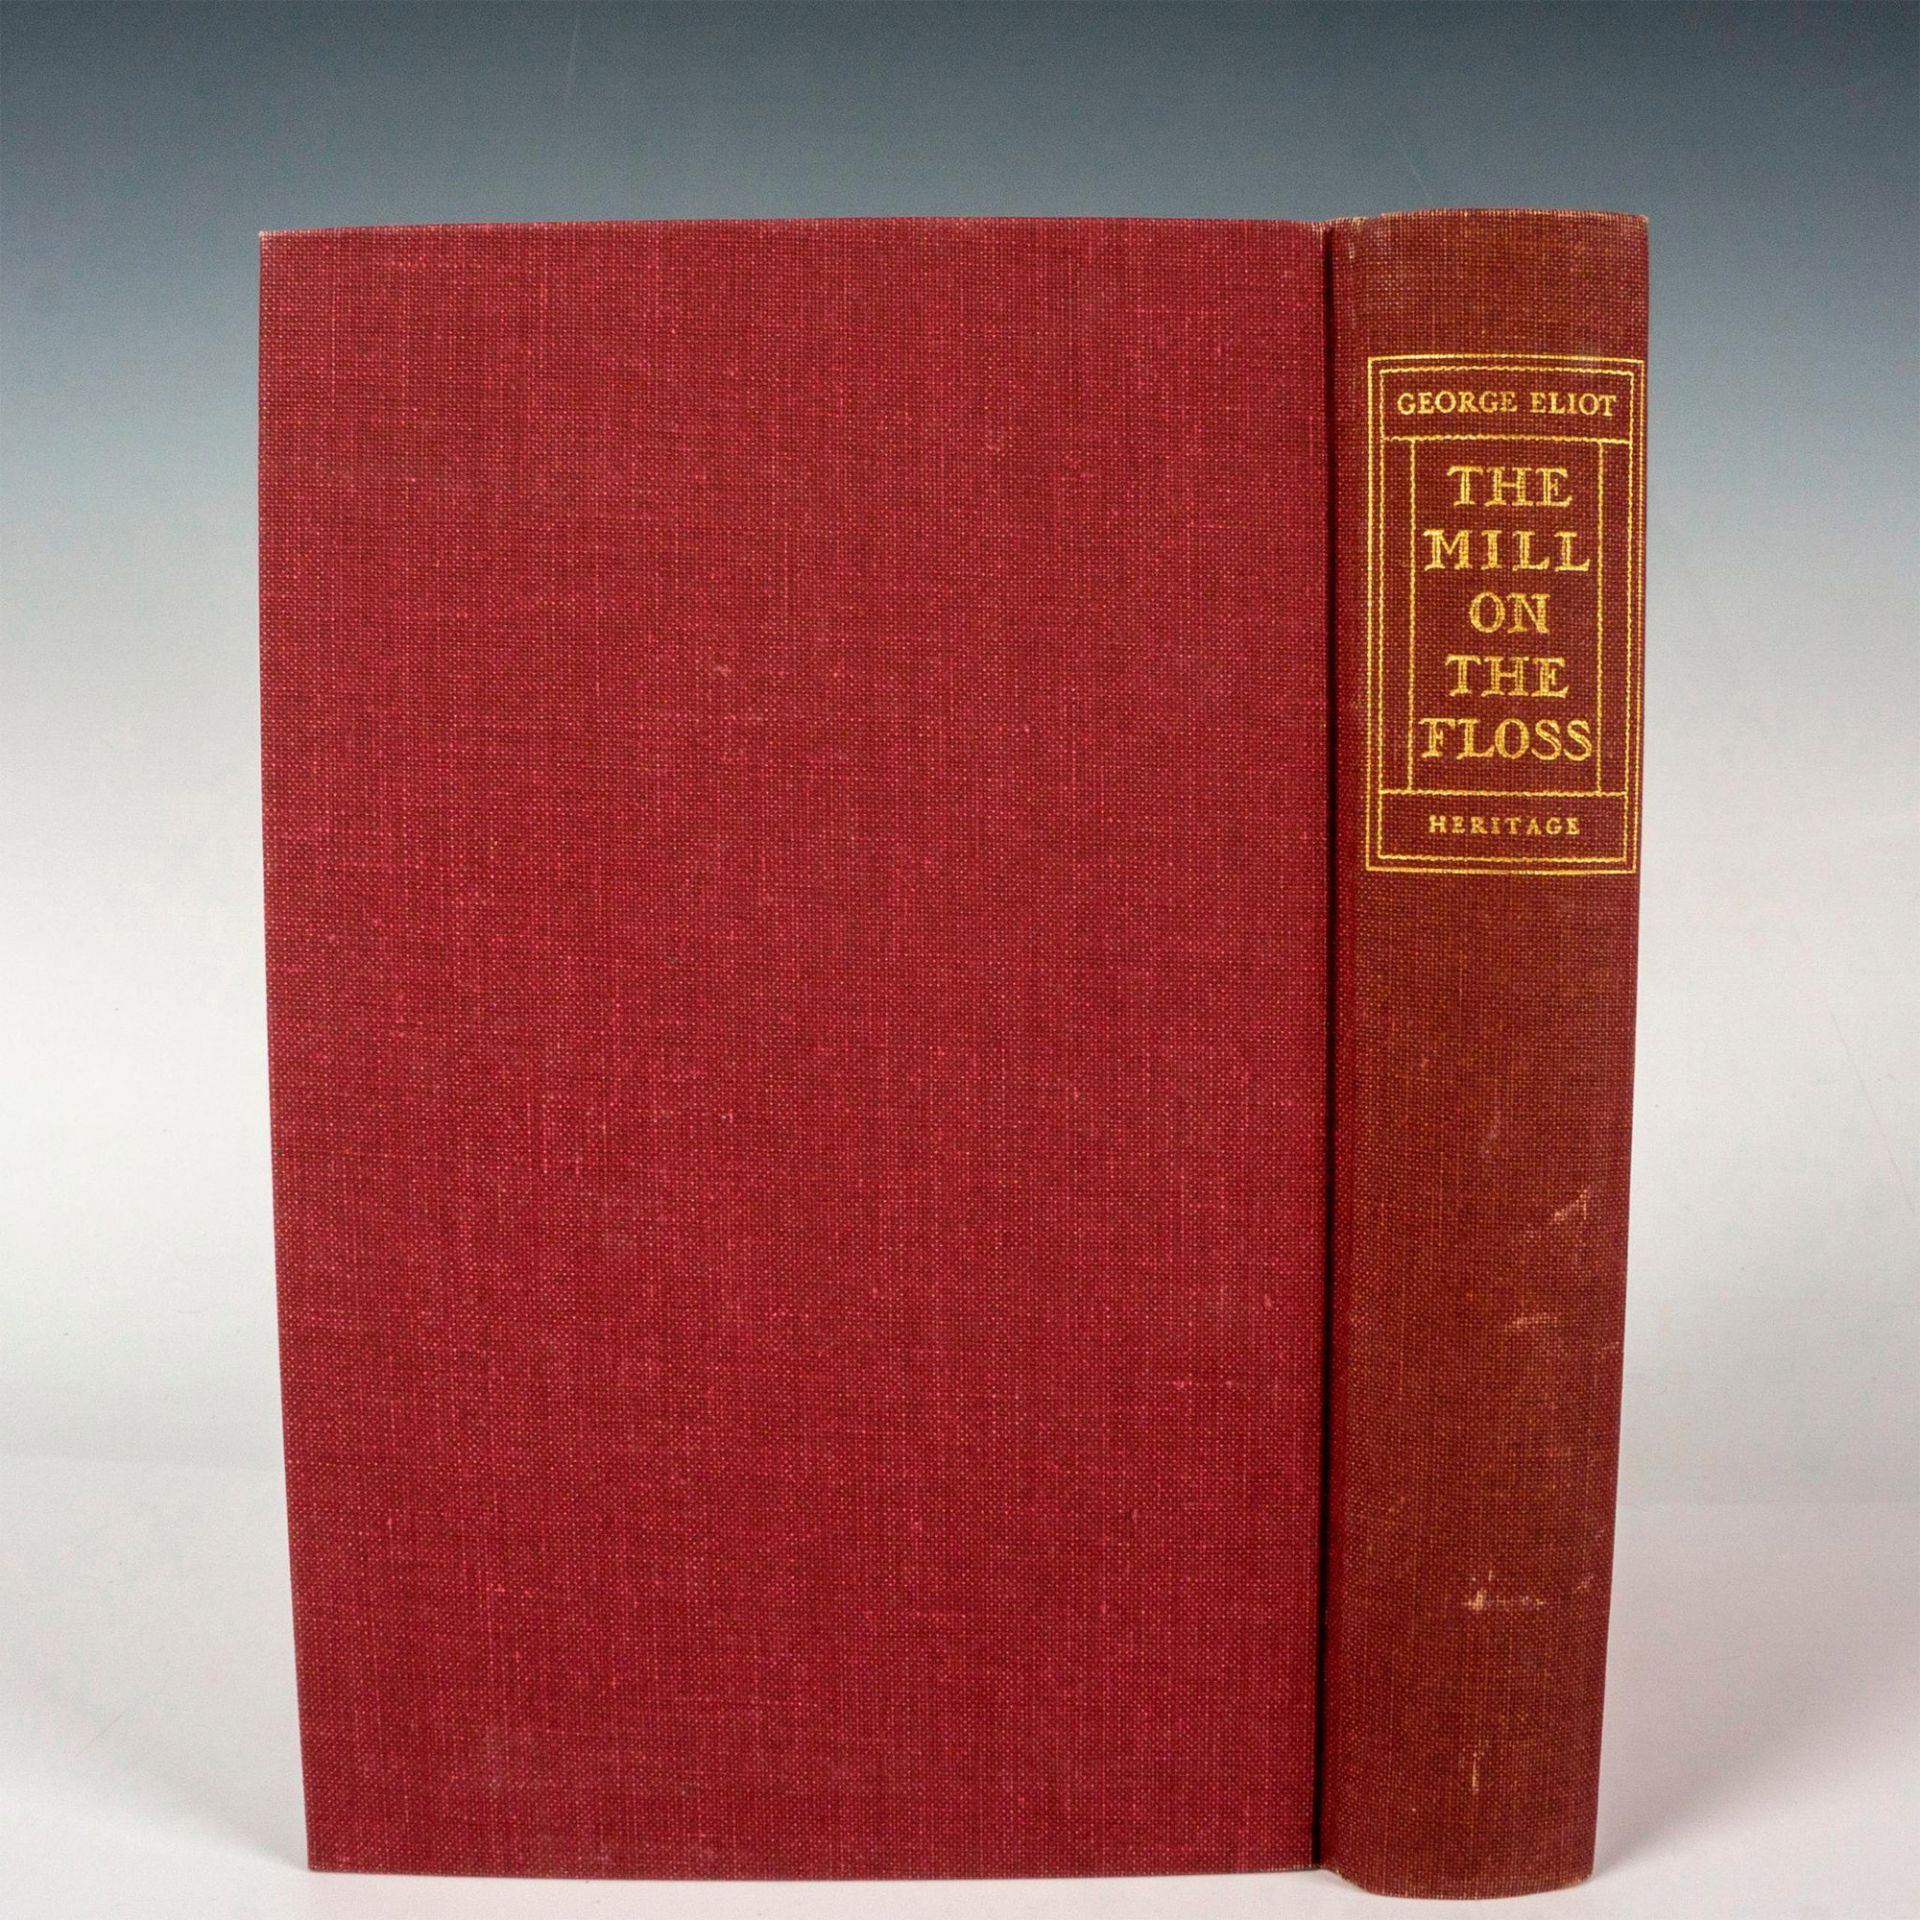 First Edition The Mill on the Floss, Book by George Eliot - Image 3 of 4